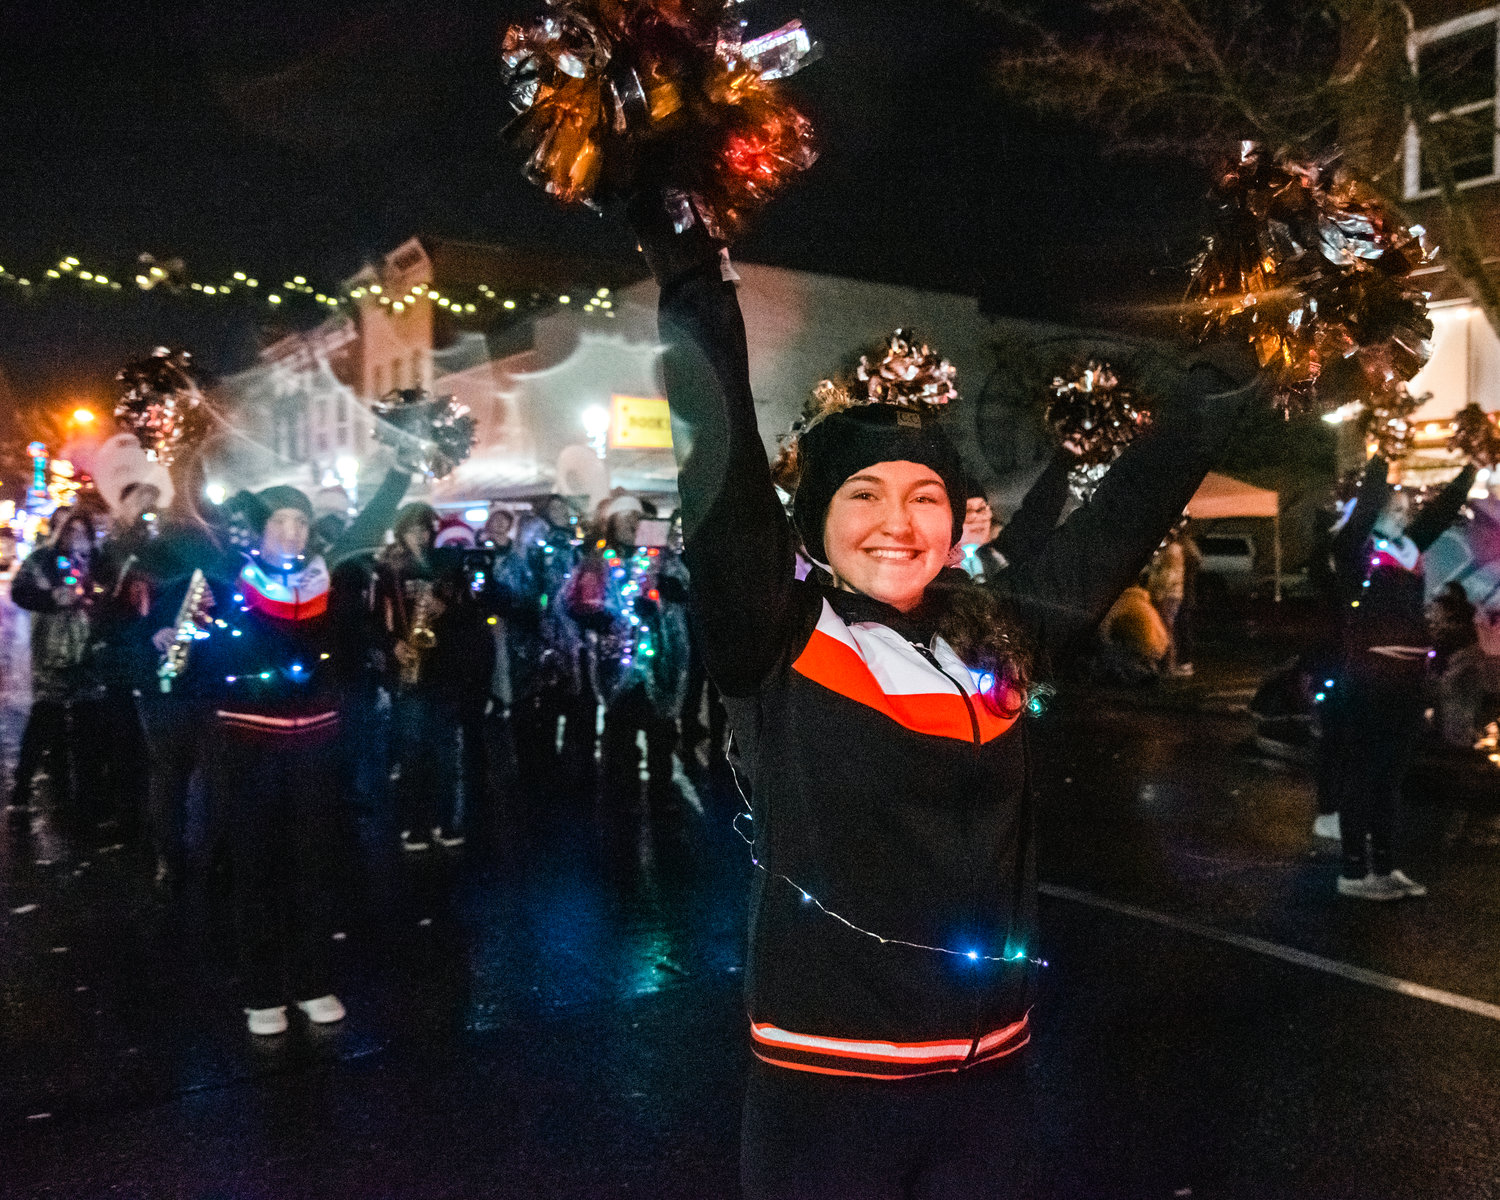 Members of Centralia Tiger Marching Band and Cheer Squad smile and wave as music plays during the Lighted Tractor Parade in Centralia Saturday night.